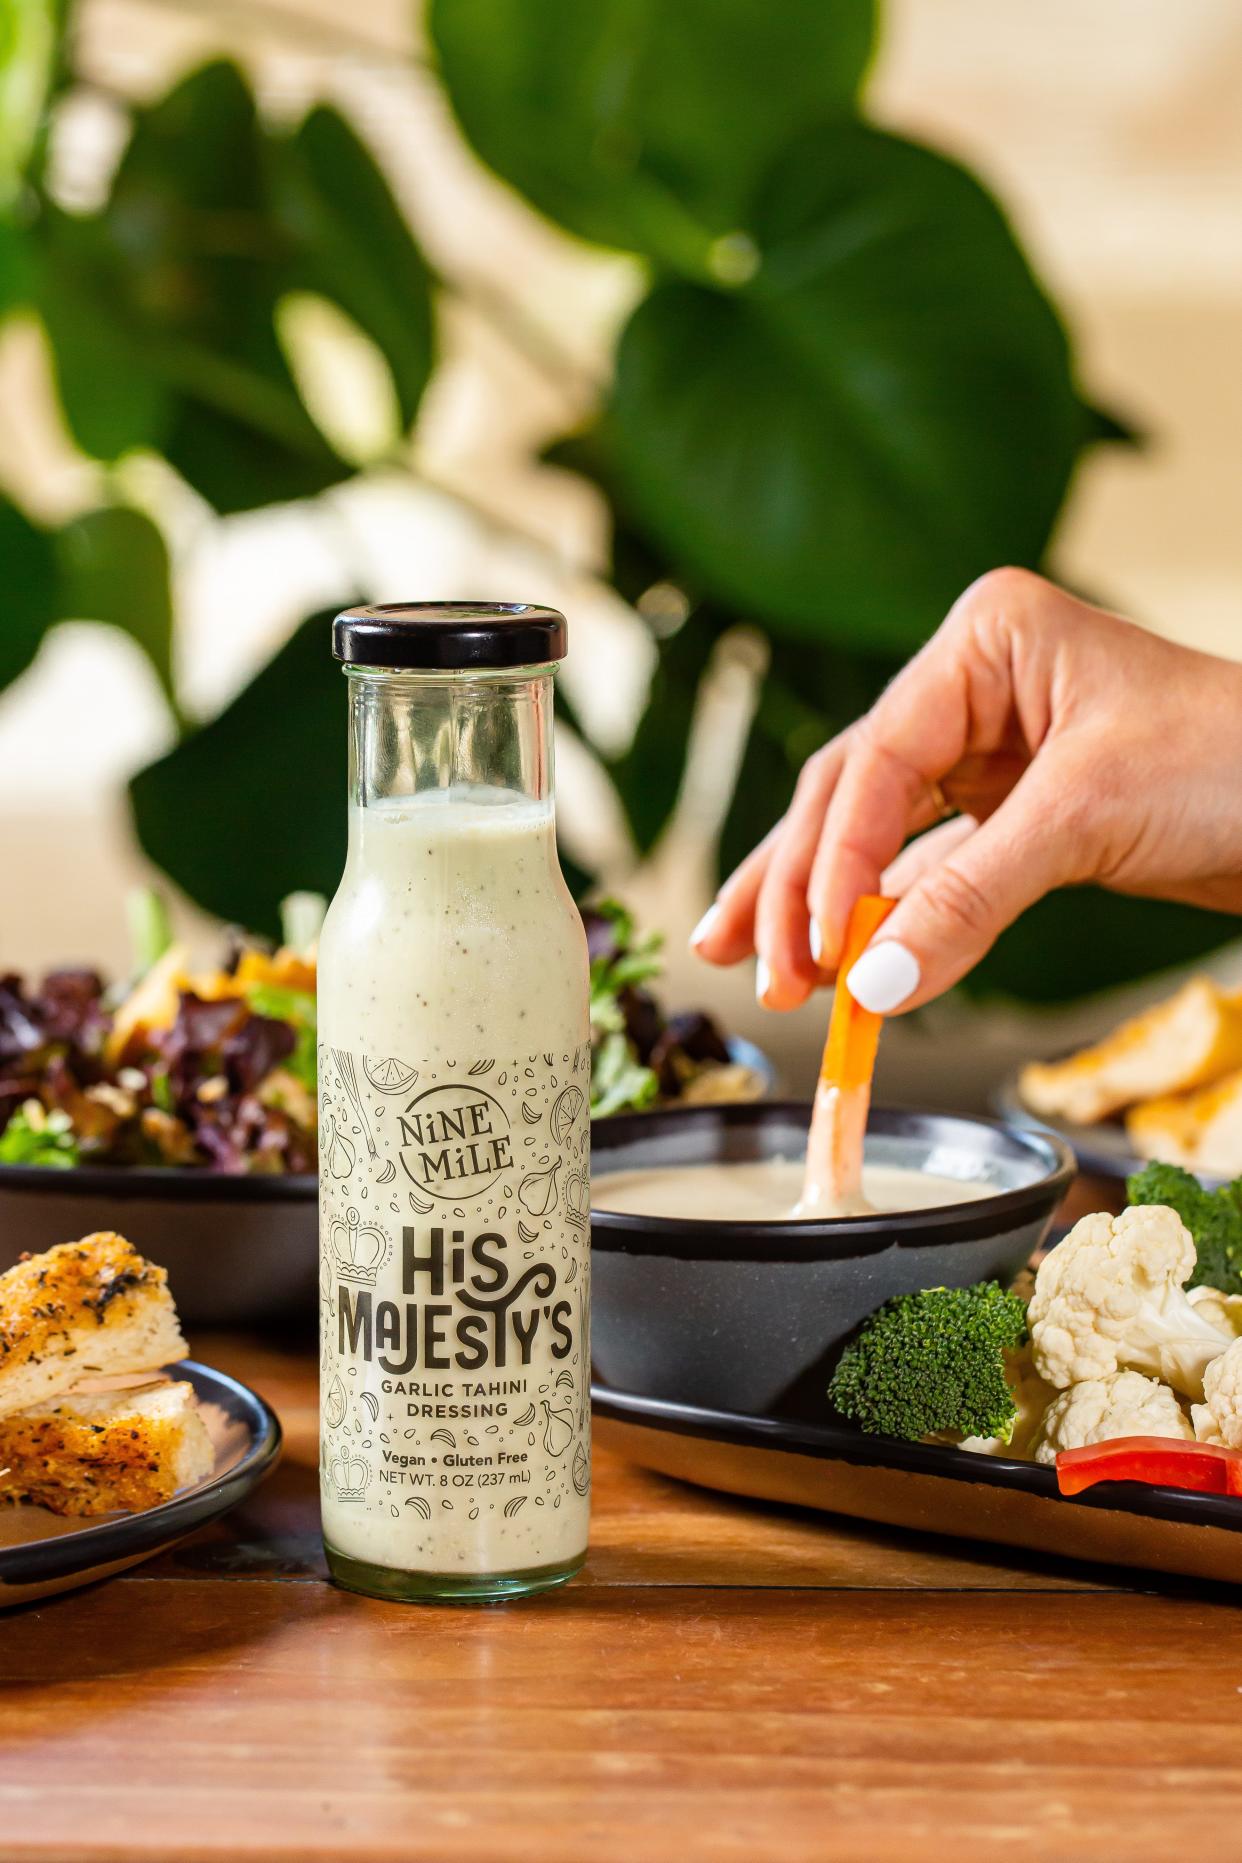 Nine Mile restaurant has released two signature salad dressings for retail sale, Hollapeño Lime (Jalapeño Lime Cilantro) and His Majesty’s (Sesame Garlic Tahini).